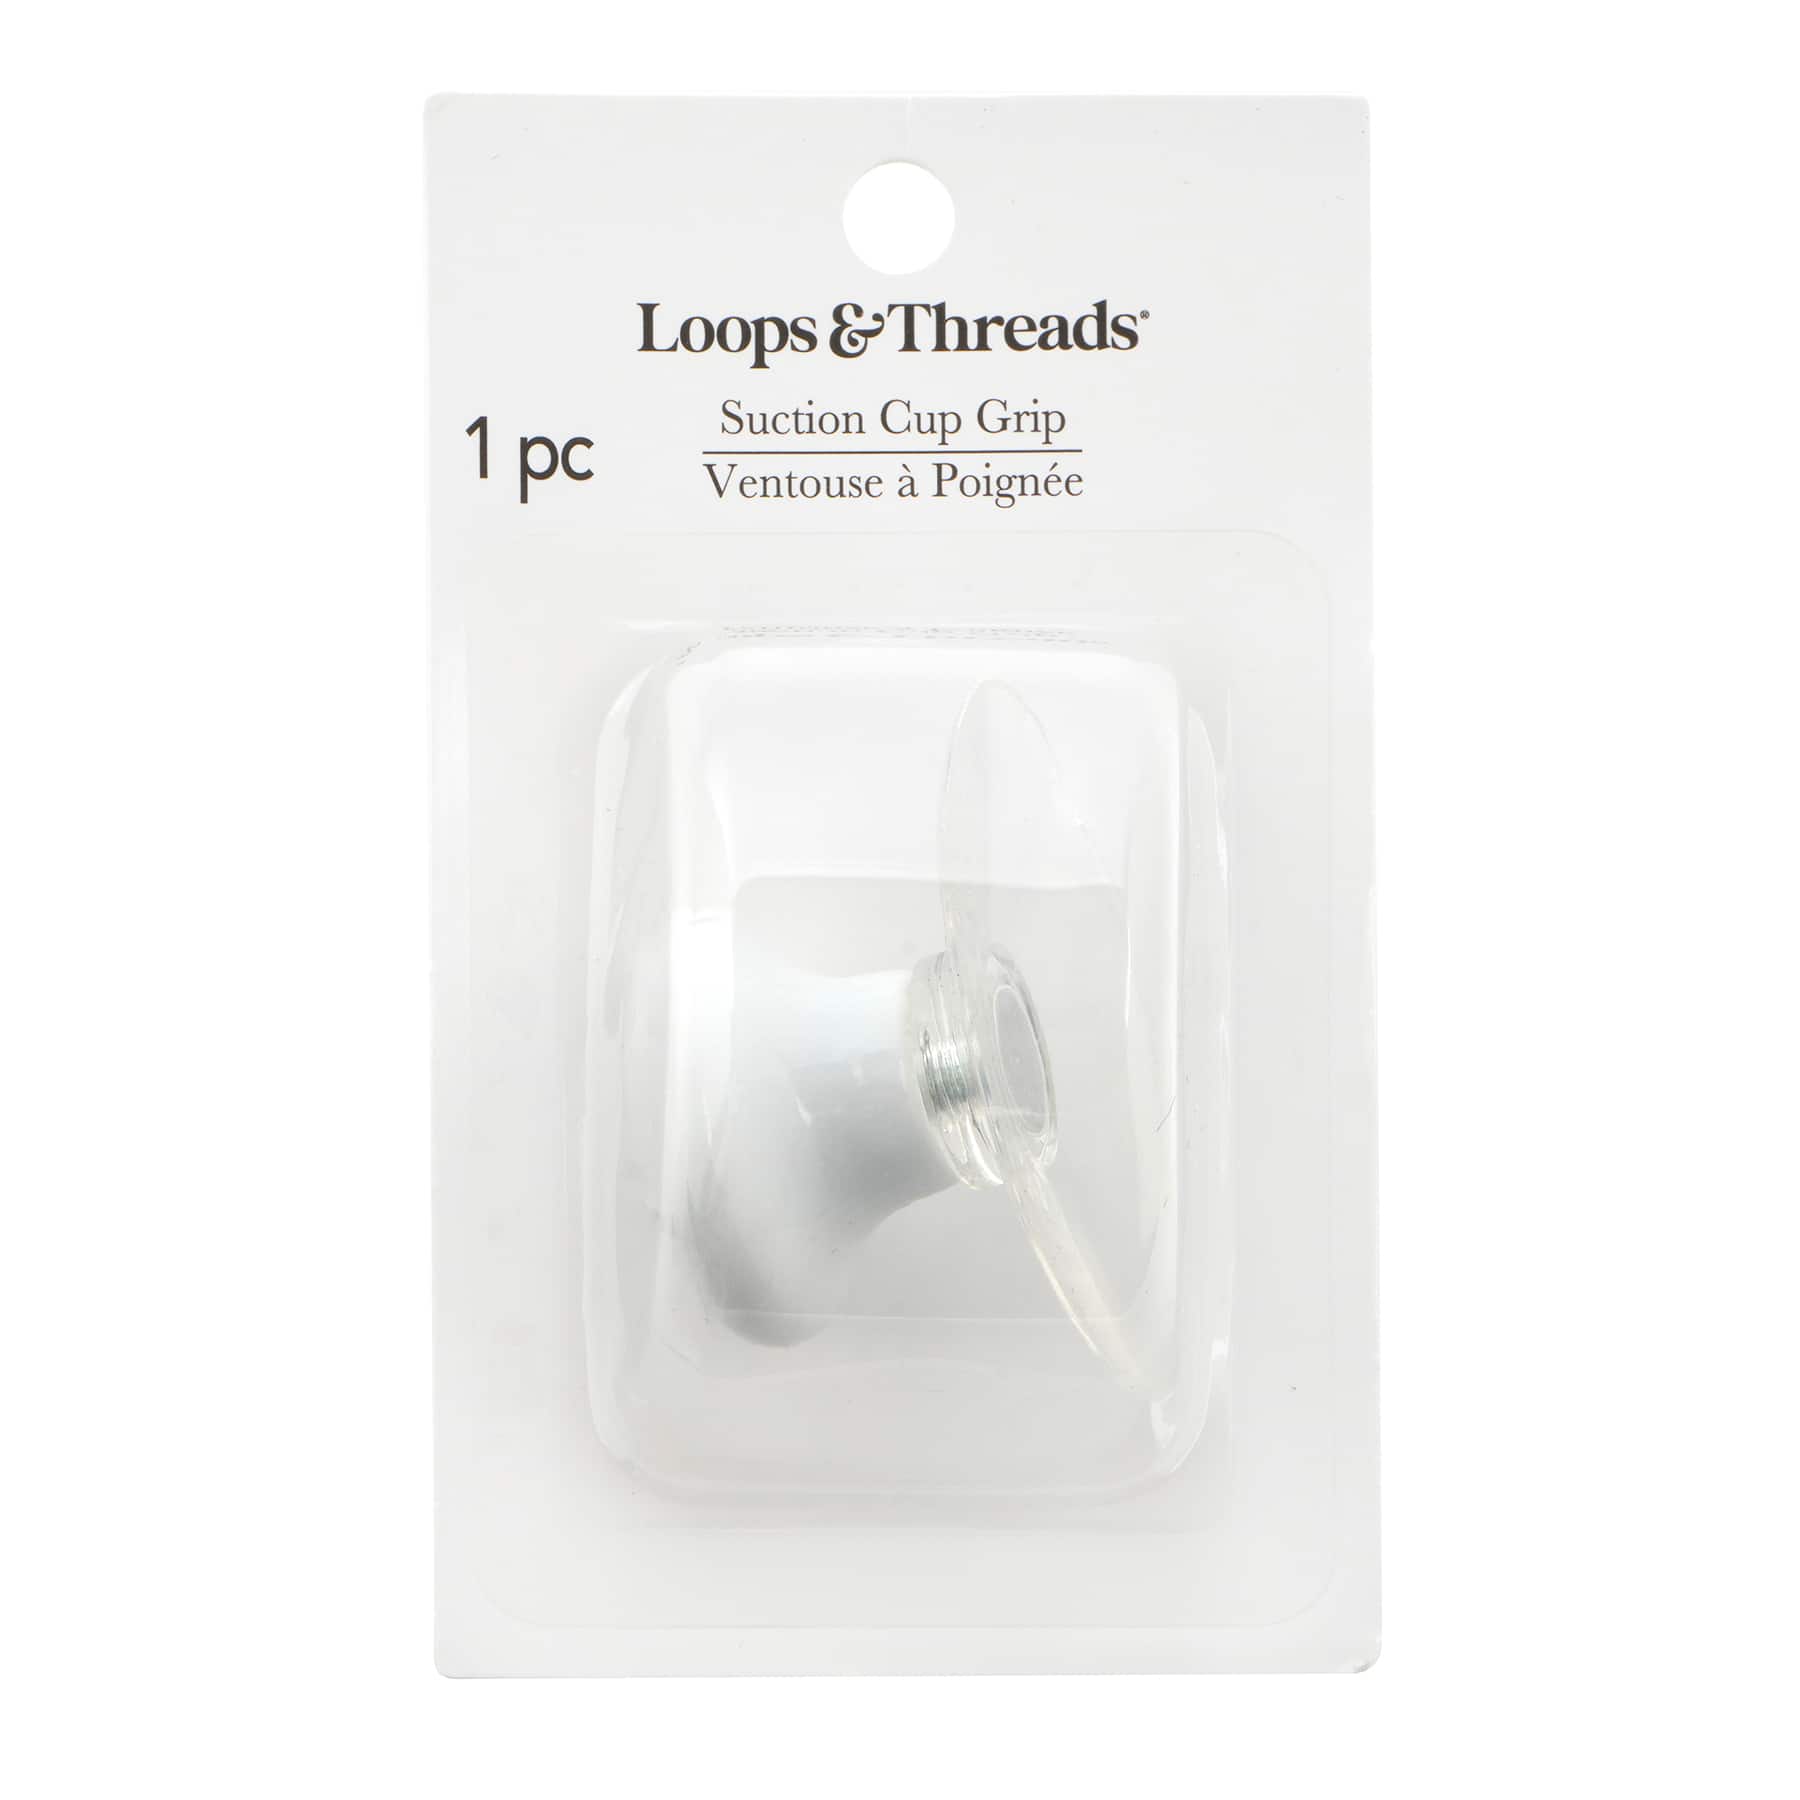 Suction Cup Grip by Loops &#x26; Threads&#xAE;